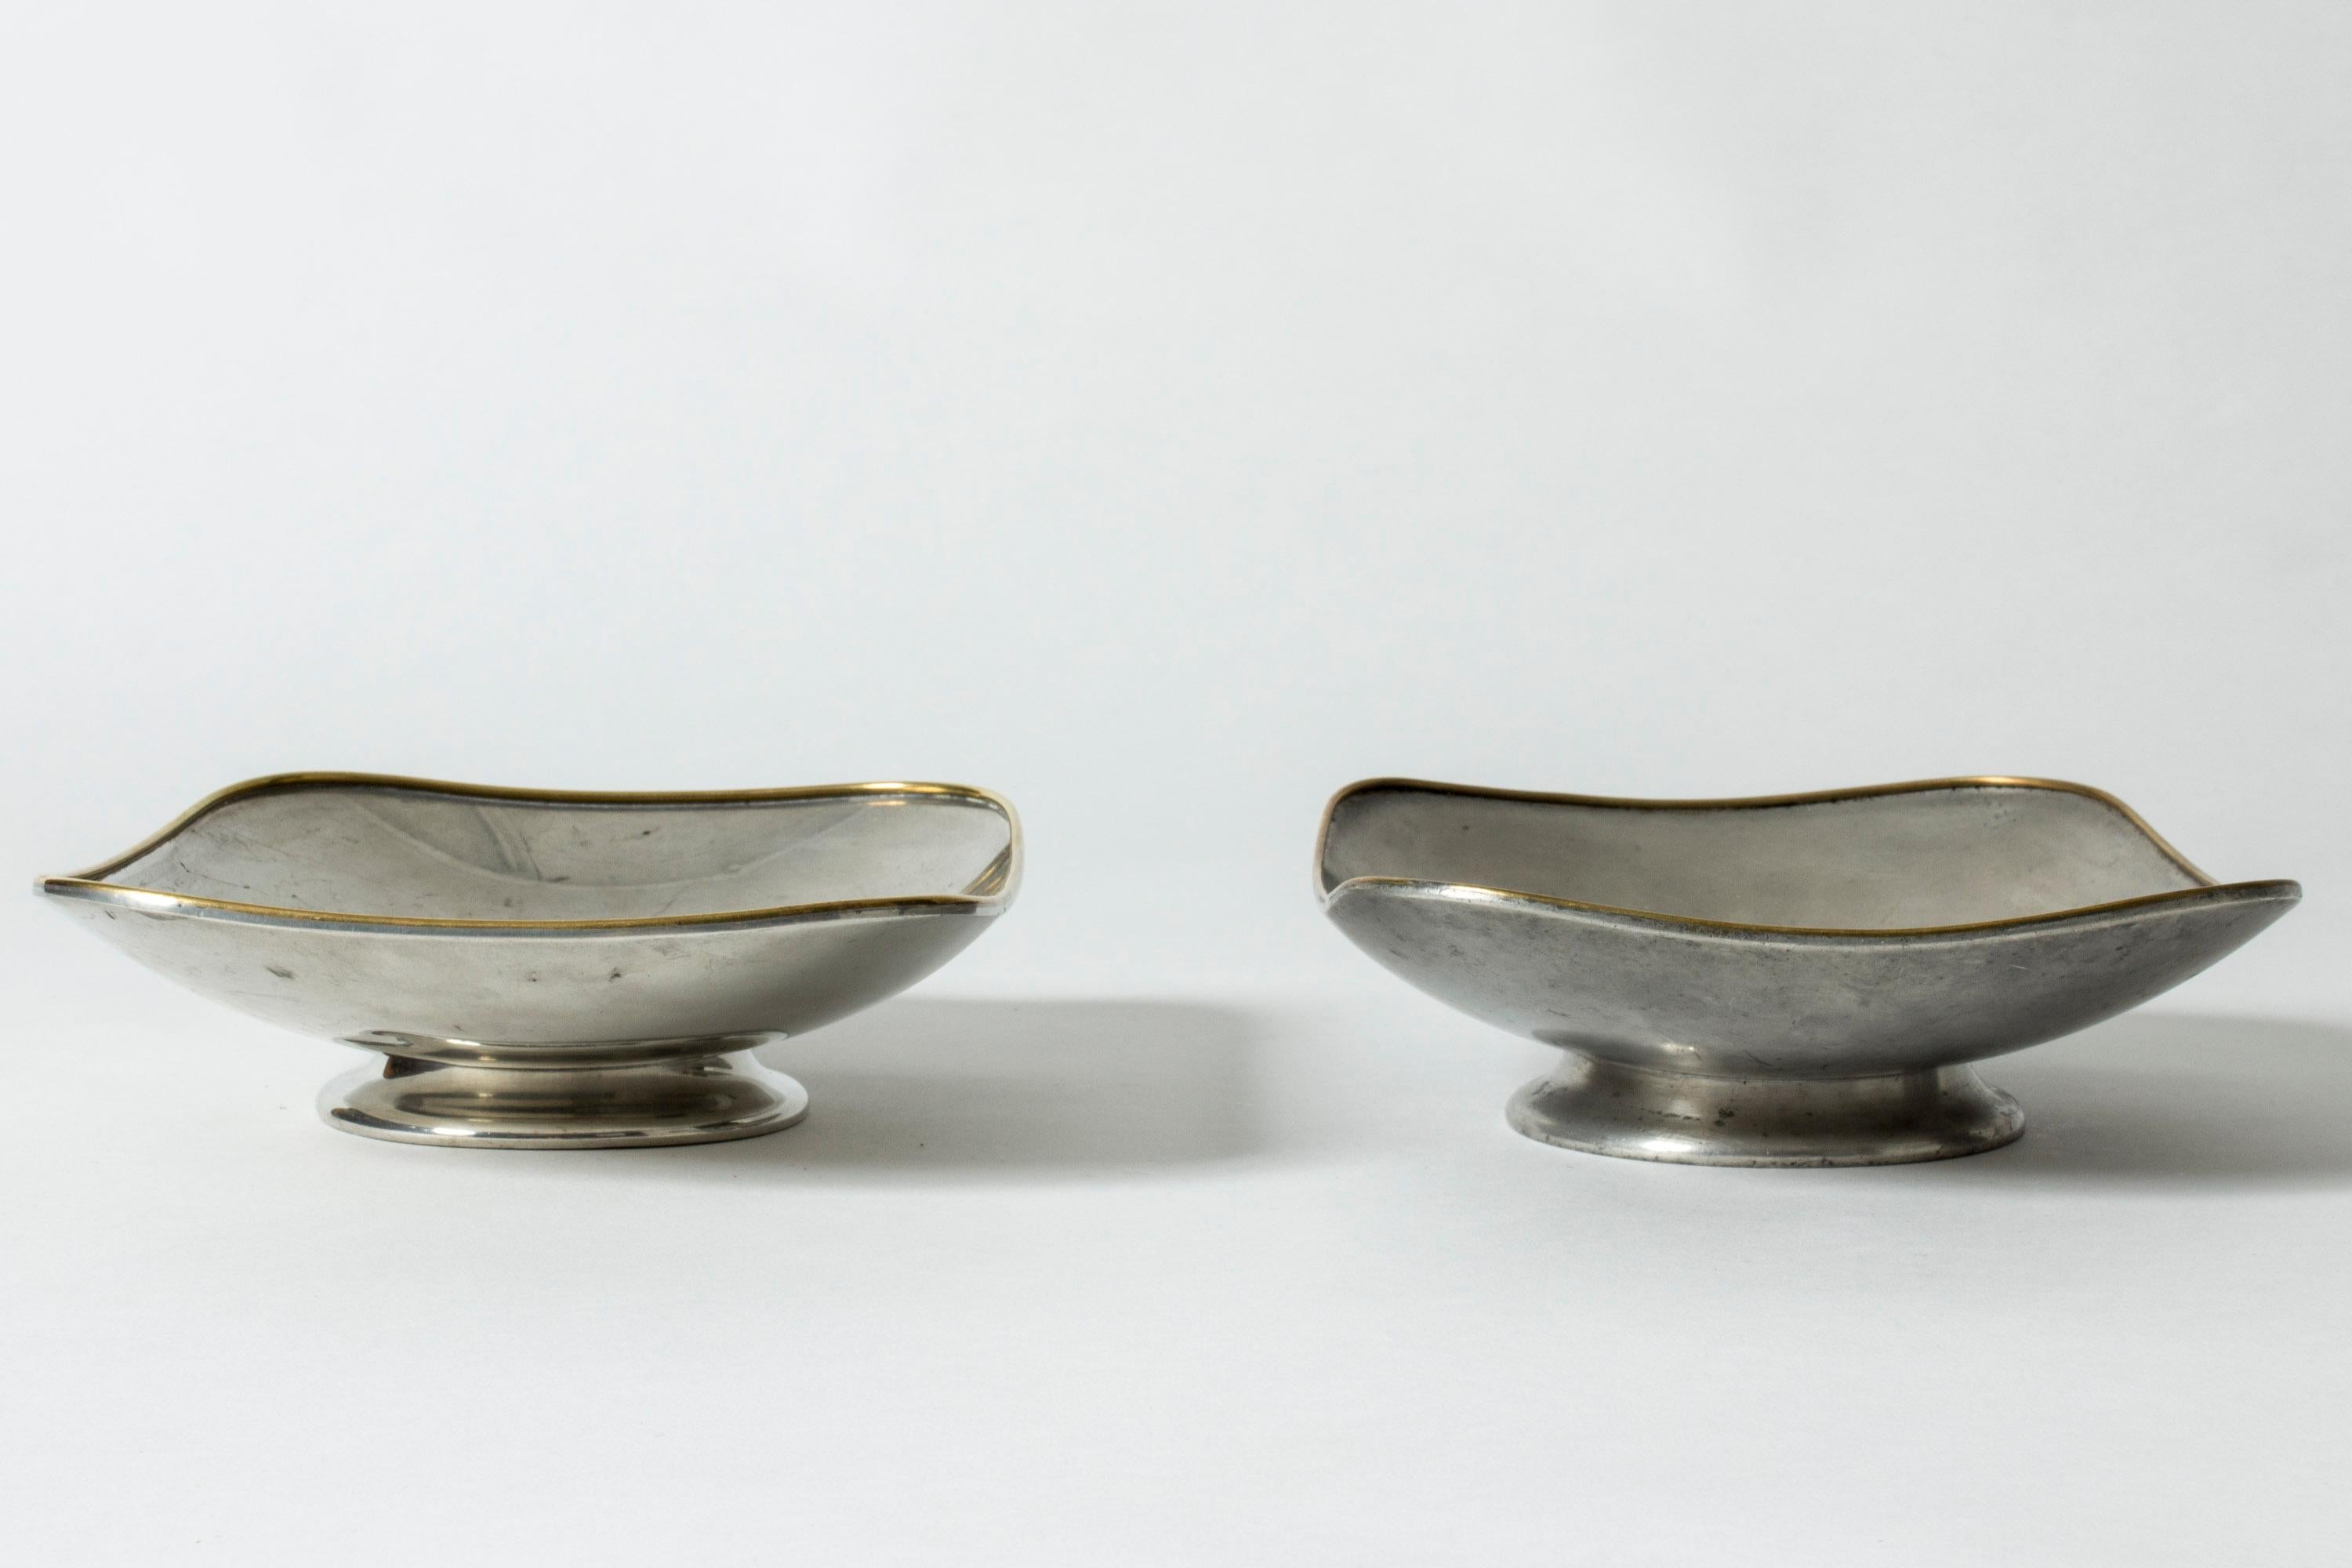 Pair of pewter serving platters by Nils Fougstedt, in a crisp modernist design. Clean lines with rounded corners, rims framed with brass lines. One is more matte while the other has a more polished finish.